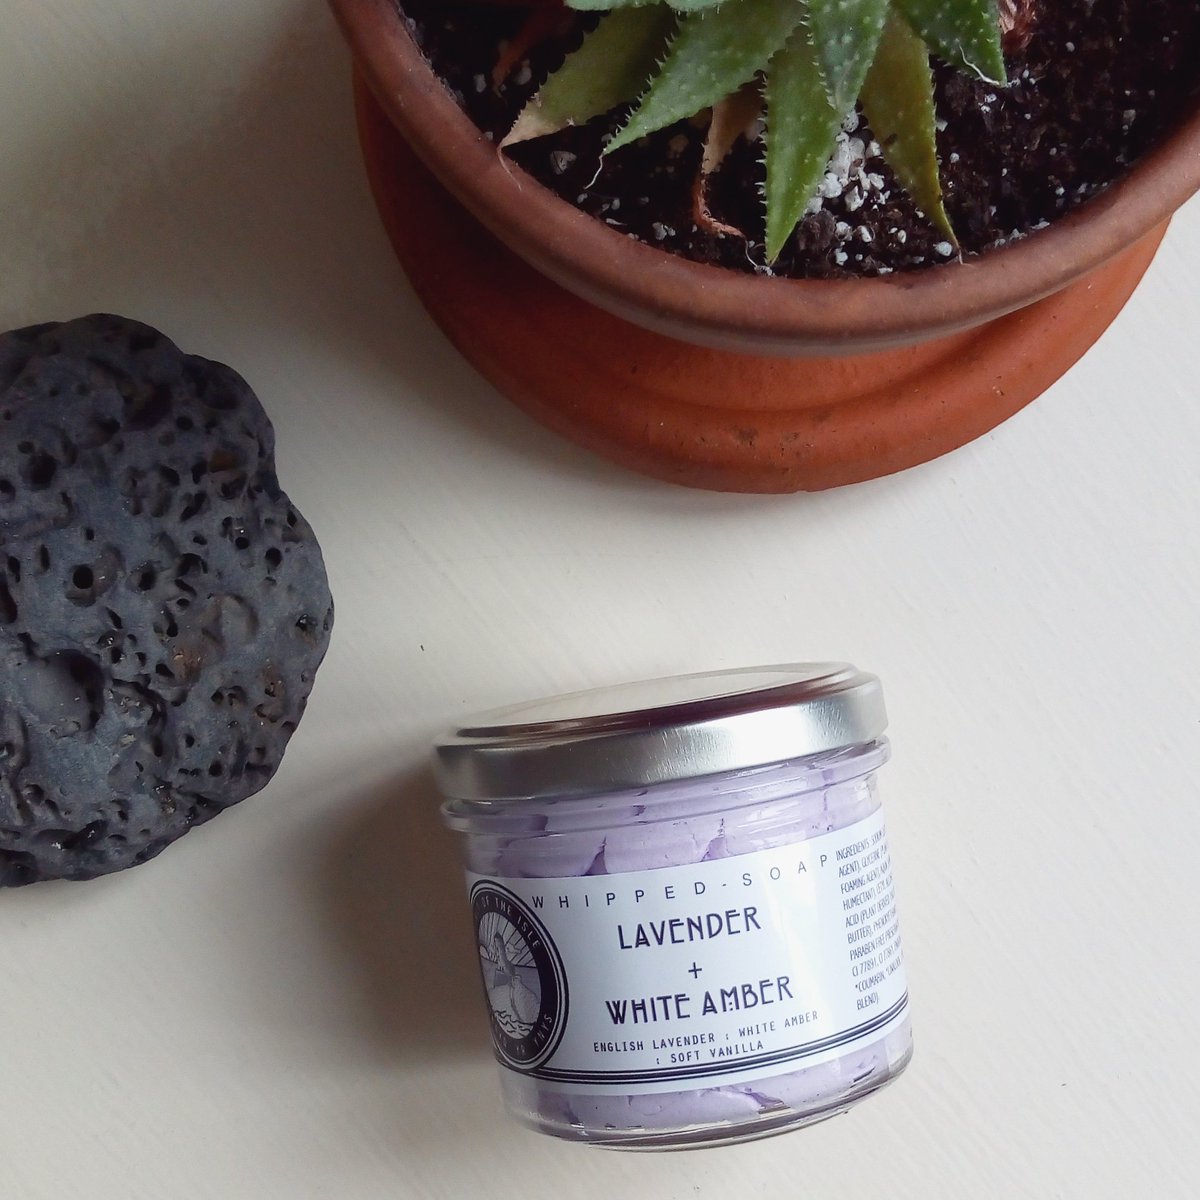 Loving our new half size jars!
#travelsize #PlasticFree #travel #holidays #beauty #vegan #skincaretips #anglesey #trialsize #succulents #lavender #UK #body #treatment #haircare